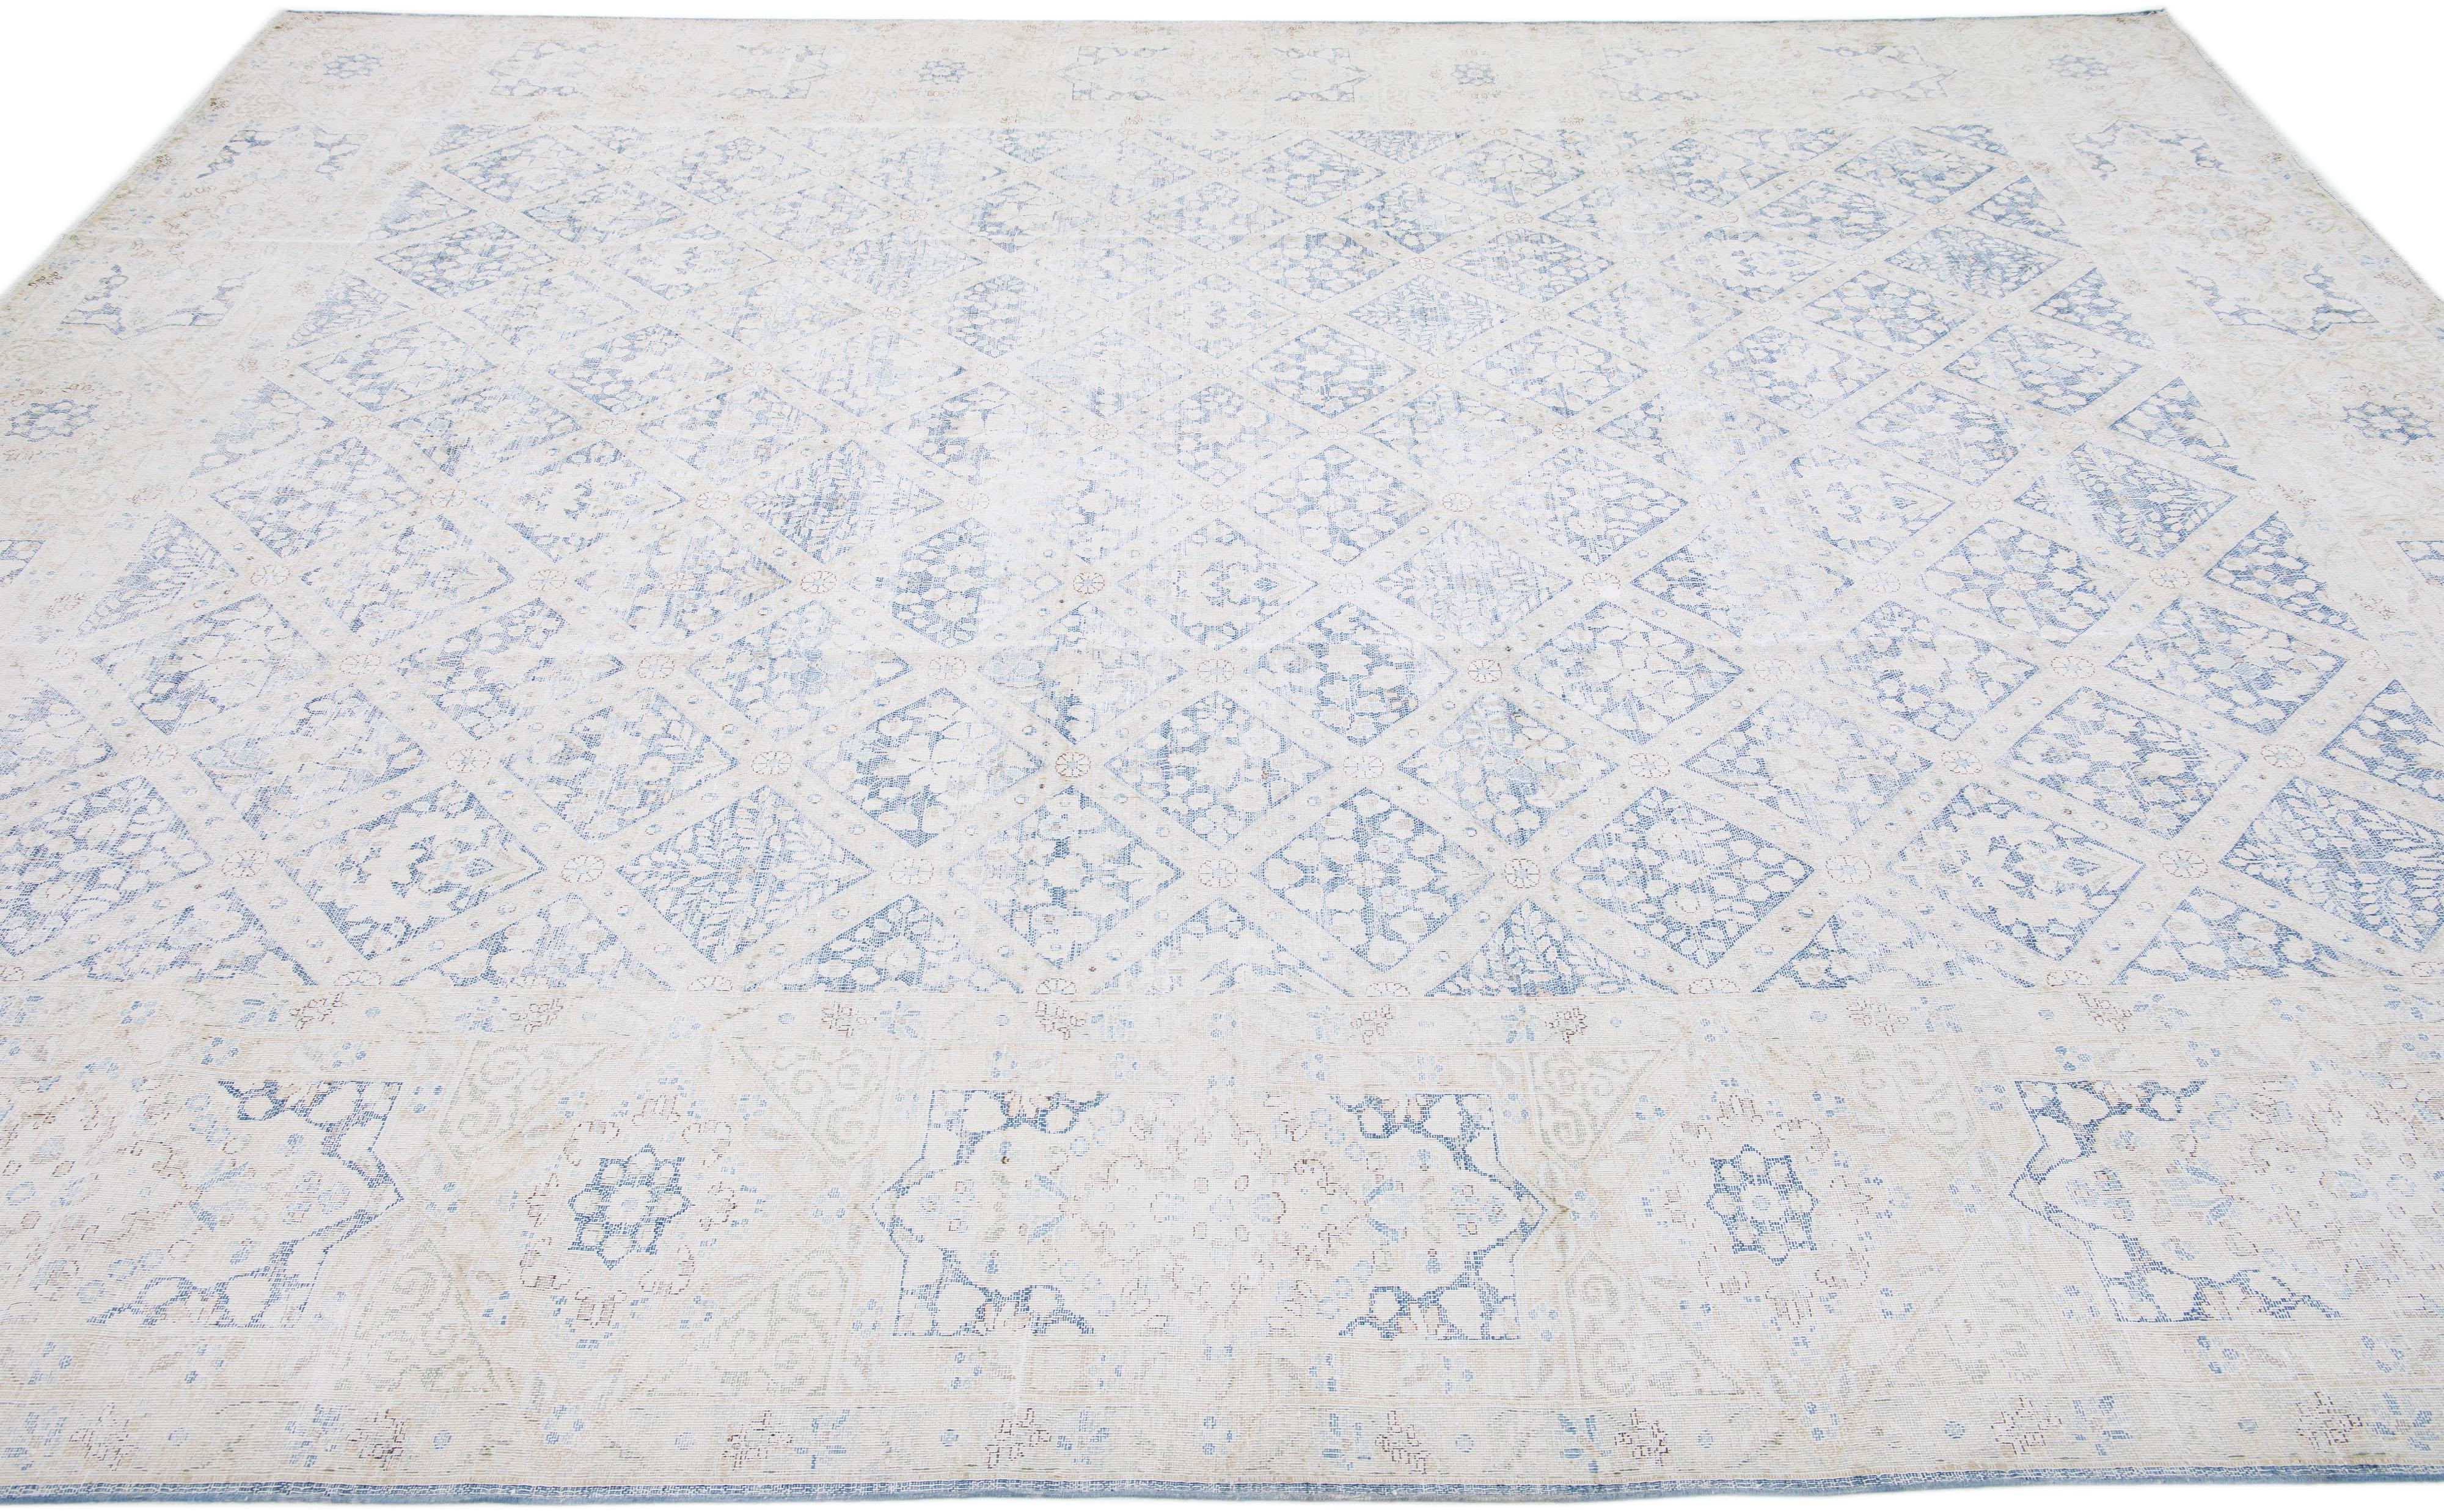 Beautiful antique Kerman hand-knotted wool rug with a beige field. This Persian rug has blue accents in a gorgeous all-over floral pattern design.

This rug measures: 9'8